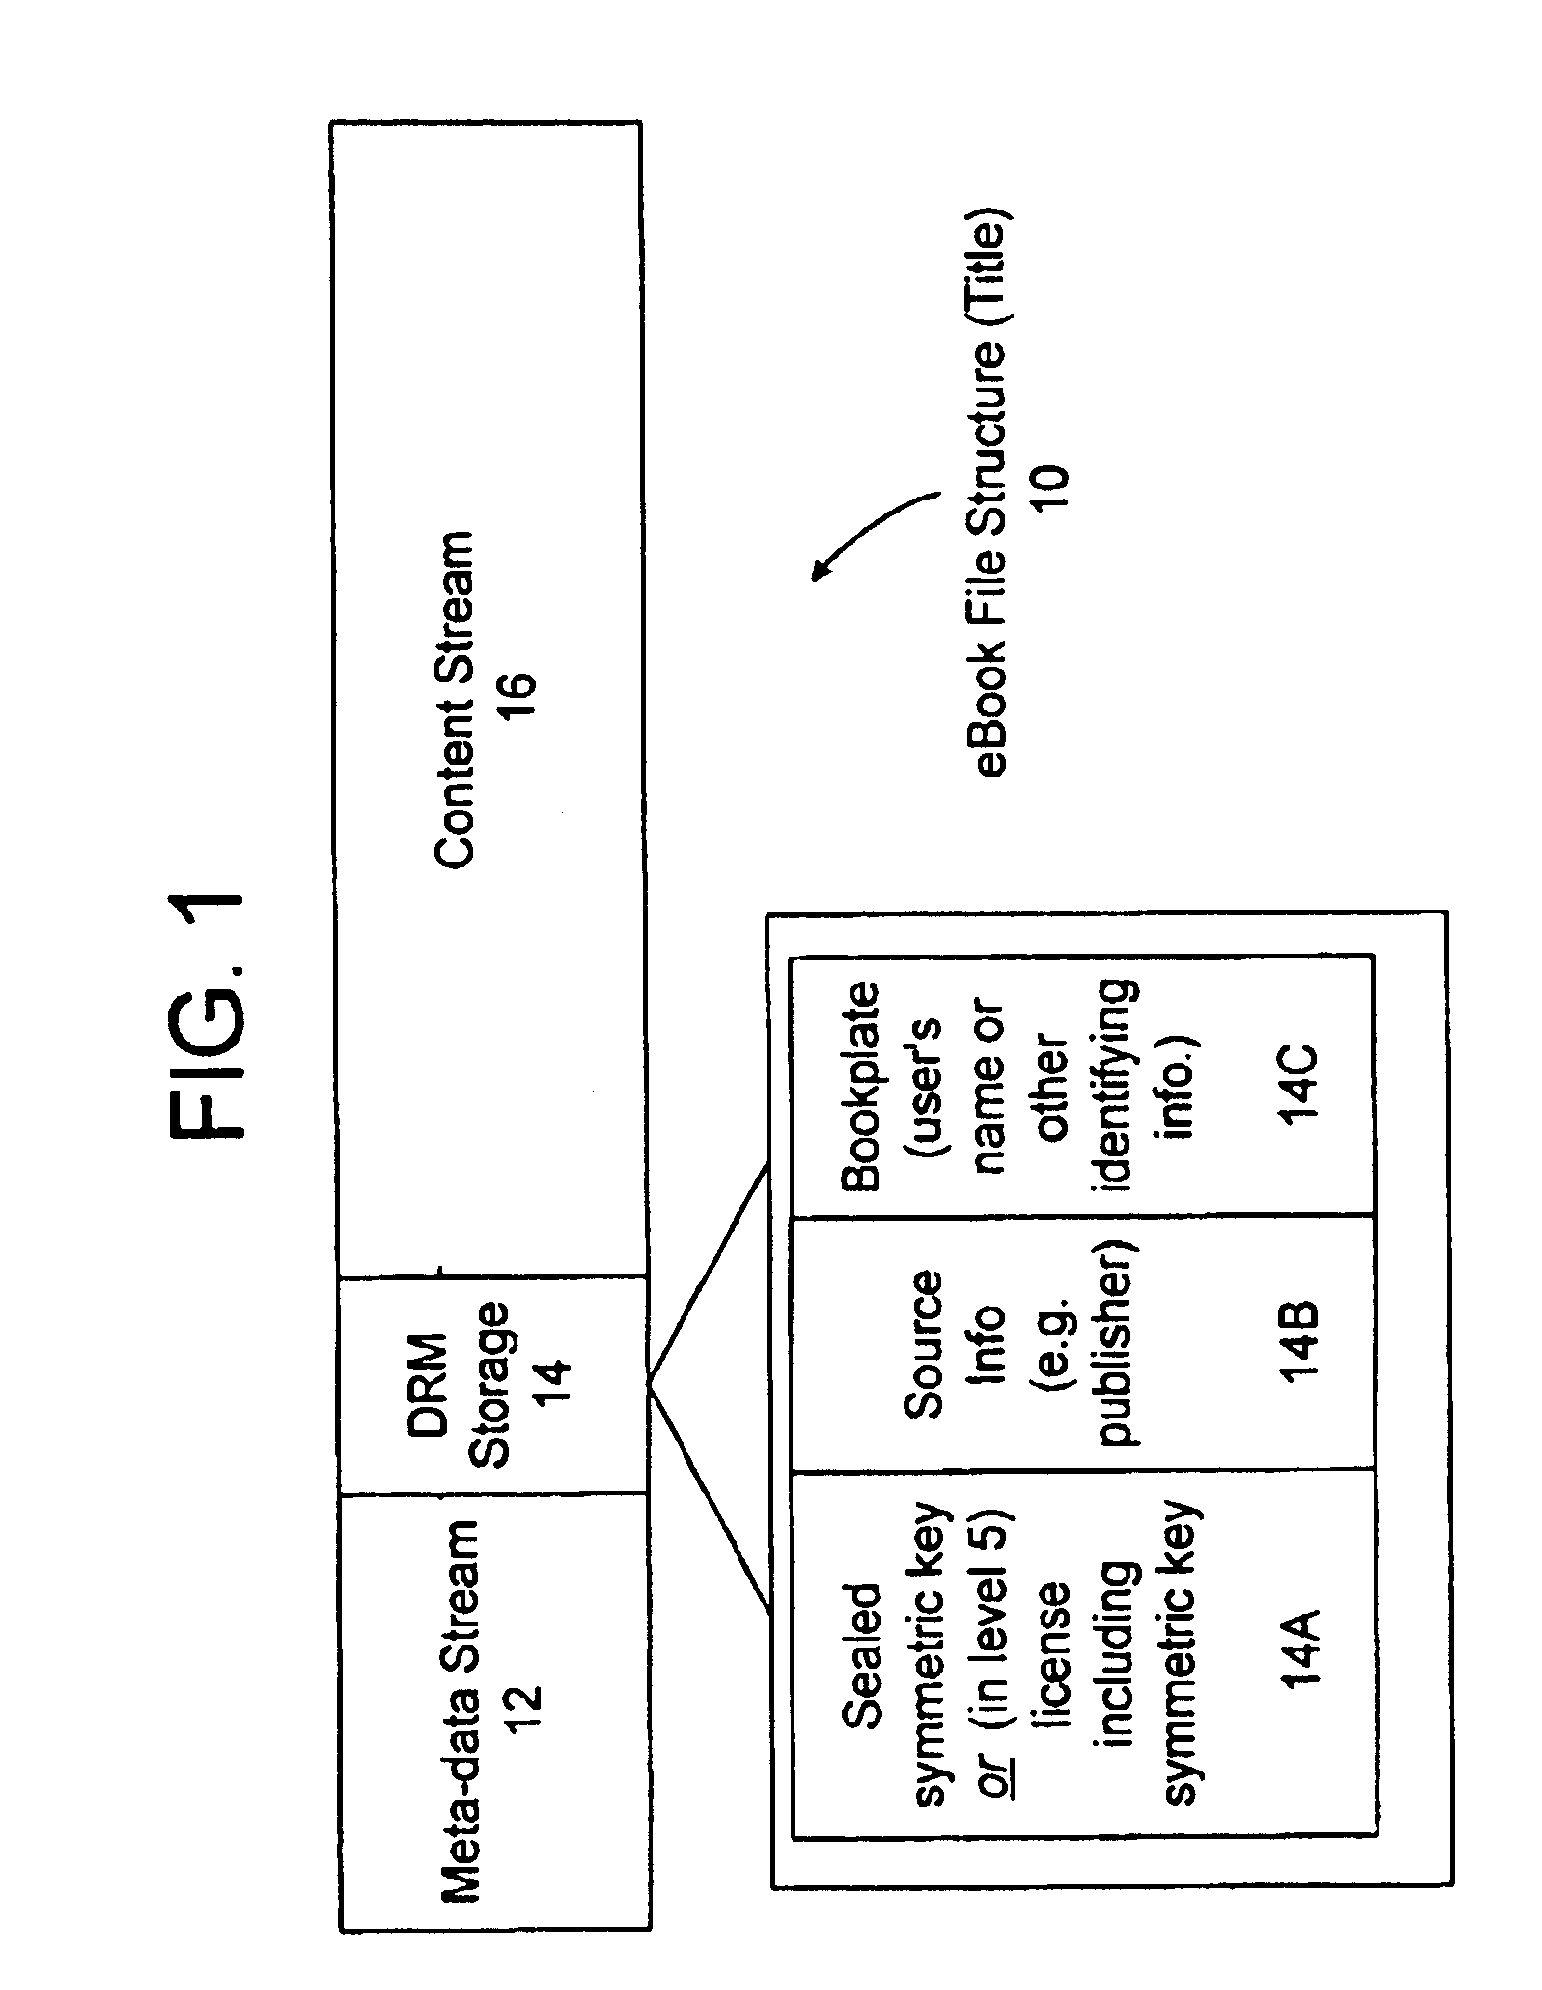 Method and system for binding enhanced software features to a persona